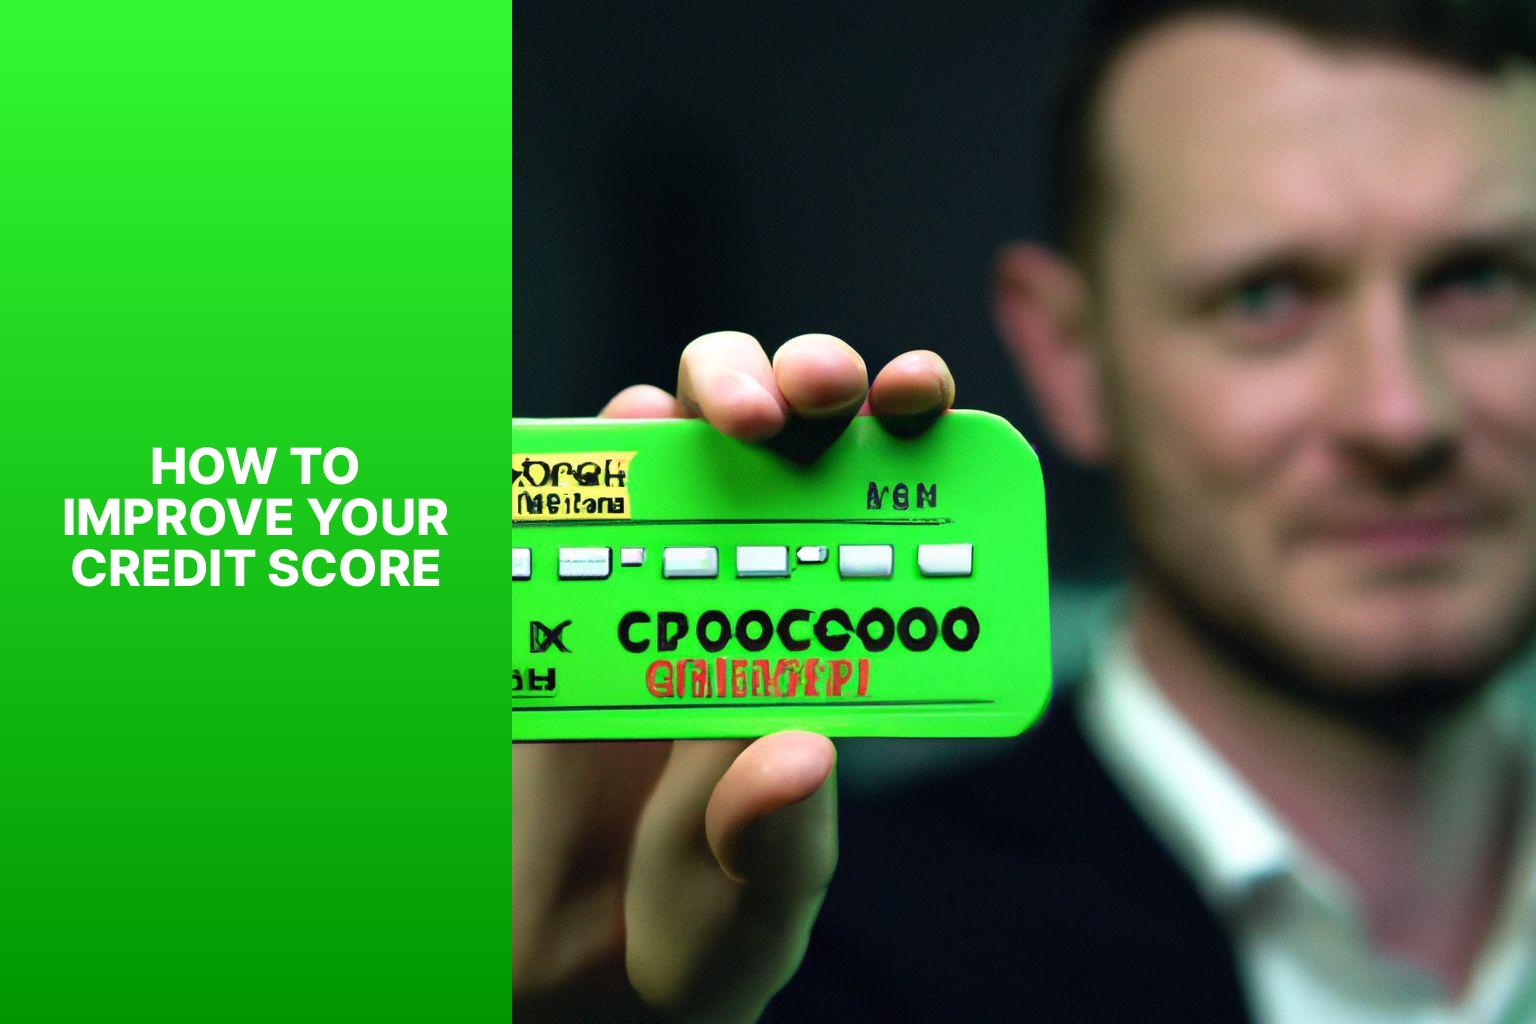 How to Improve Your Credit Score - The Green Light: How to Get a Business Loan with Good Credit 